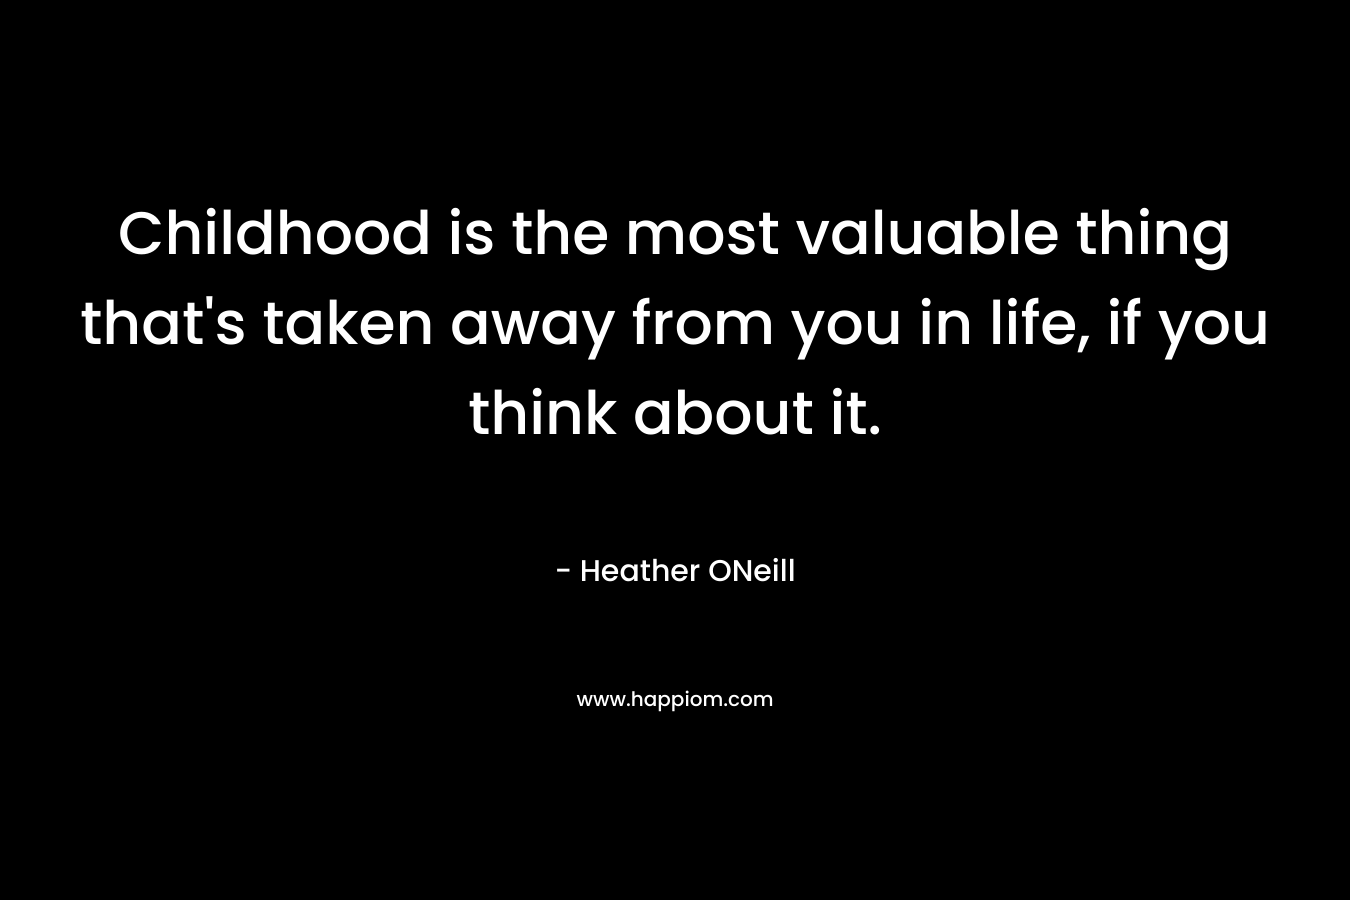 Childhood is the most valuable thing that’s taken away from you in life, if you think about it. – Heather ONeill